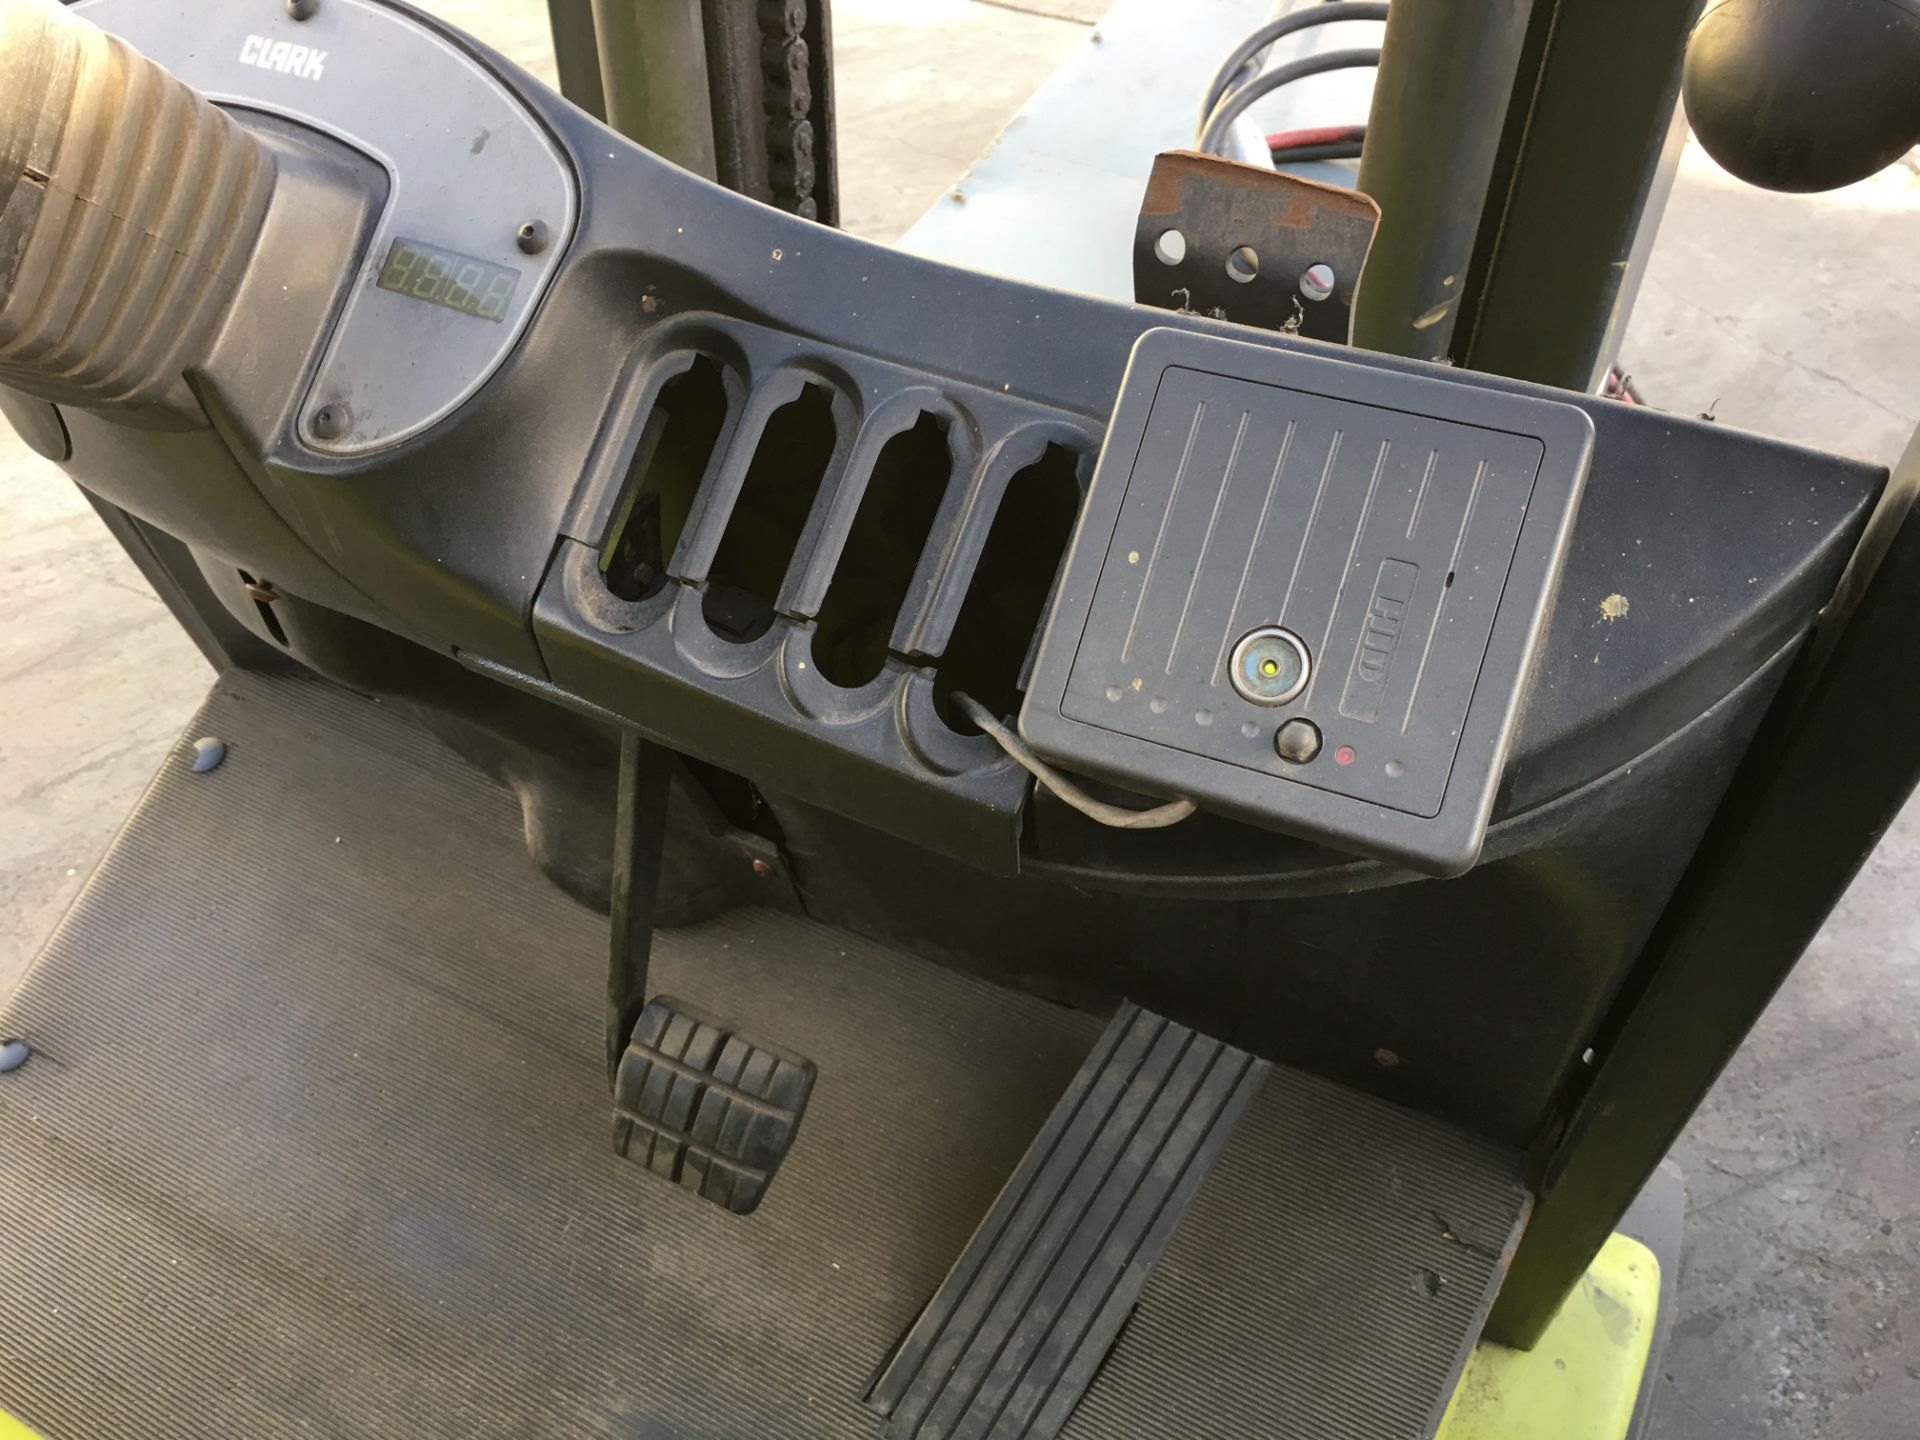 CLARK 4500 LB CAPACITY ELECTRIC FORKLIFT WITH BATTERY CHARGER Loading Fee: 100 - Image 8 of 9